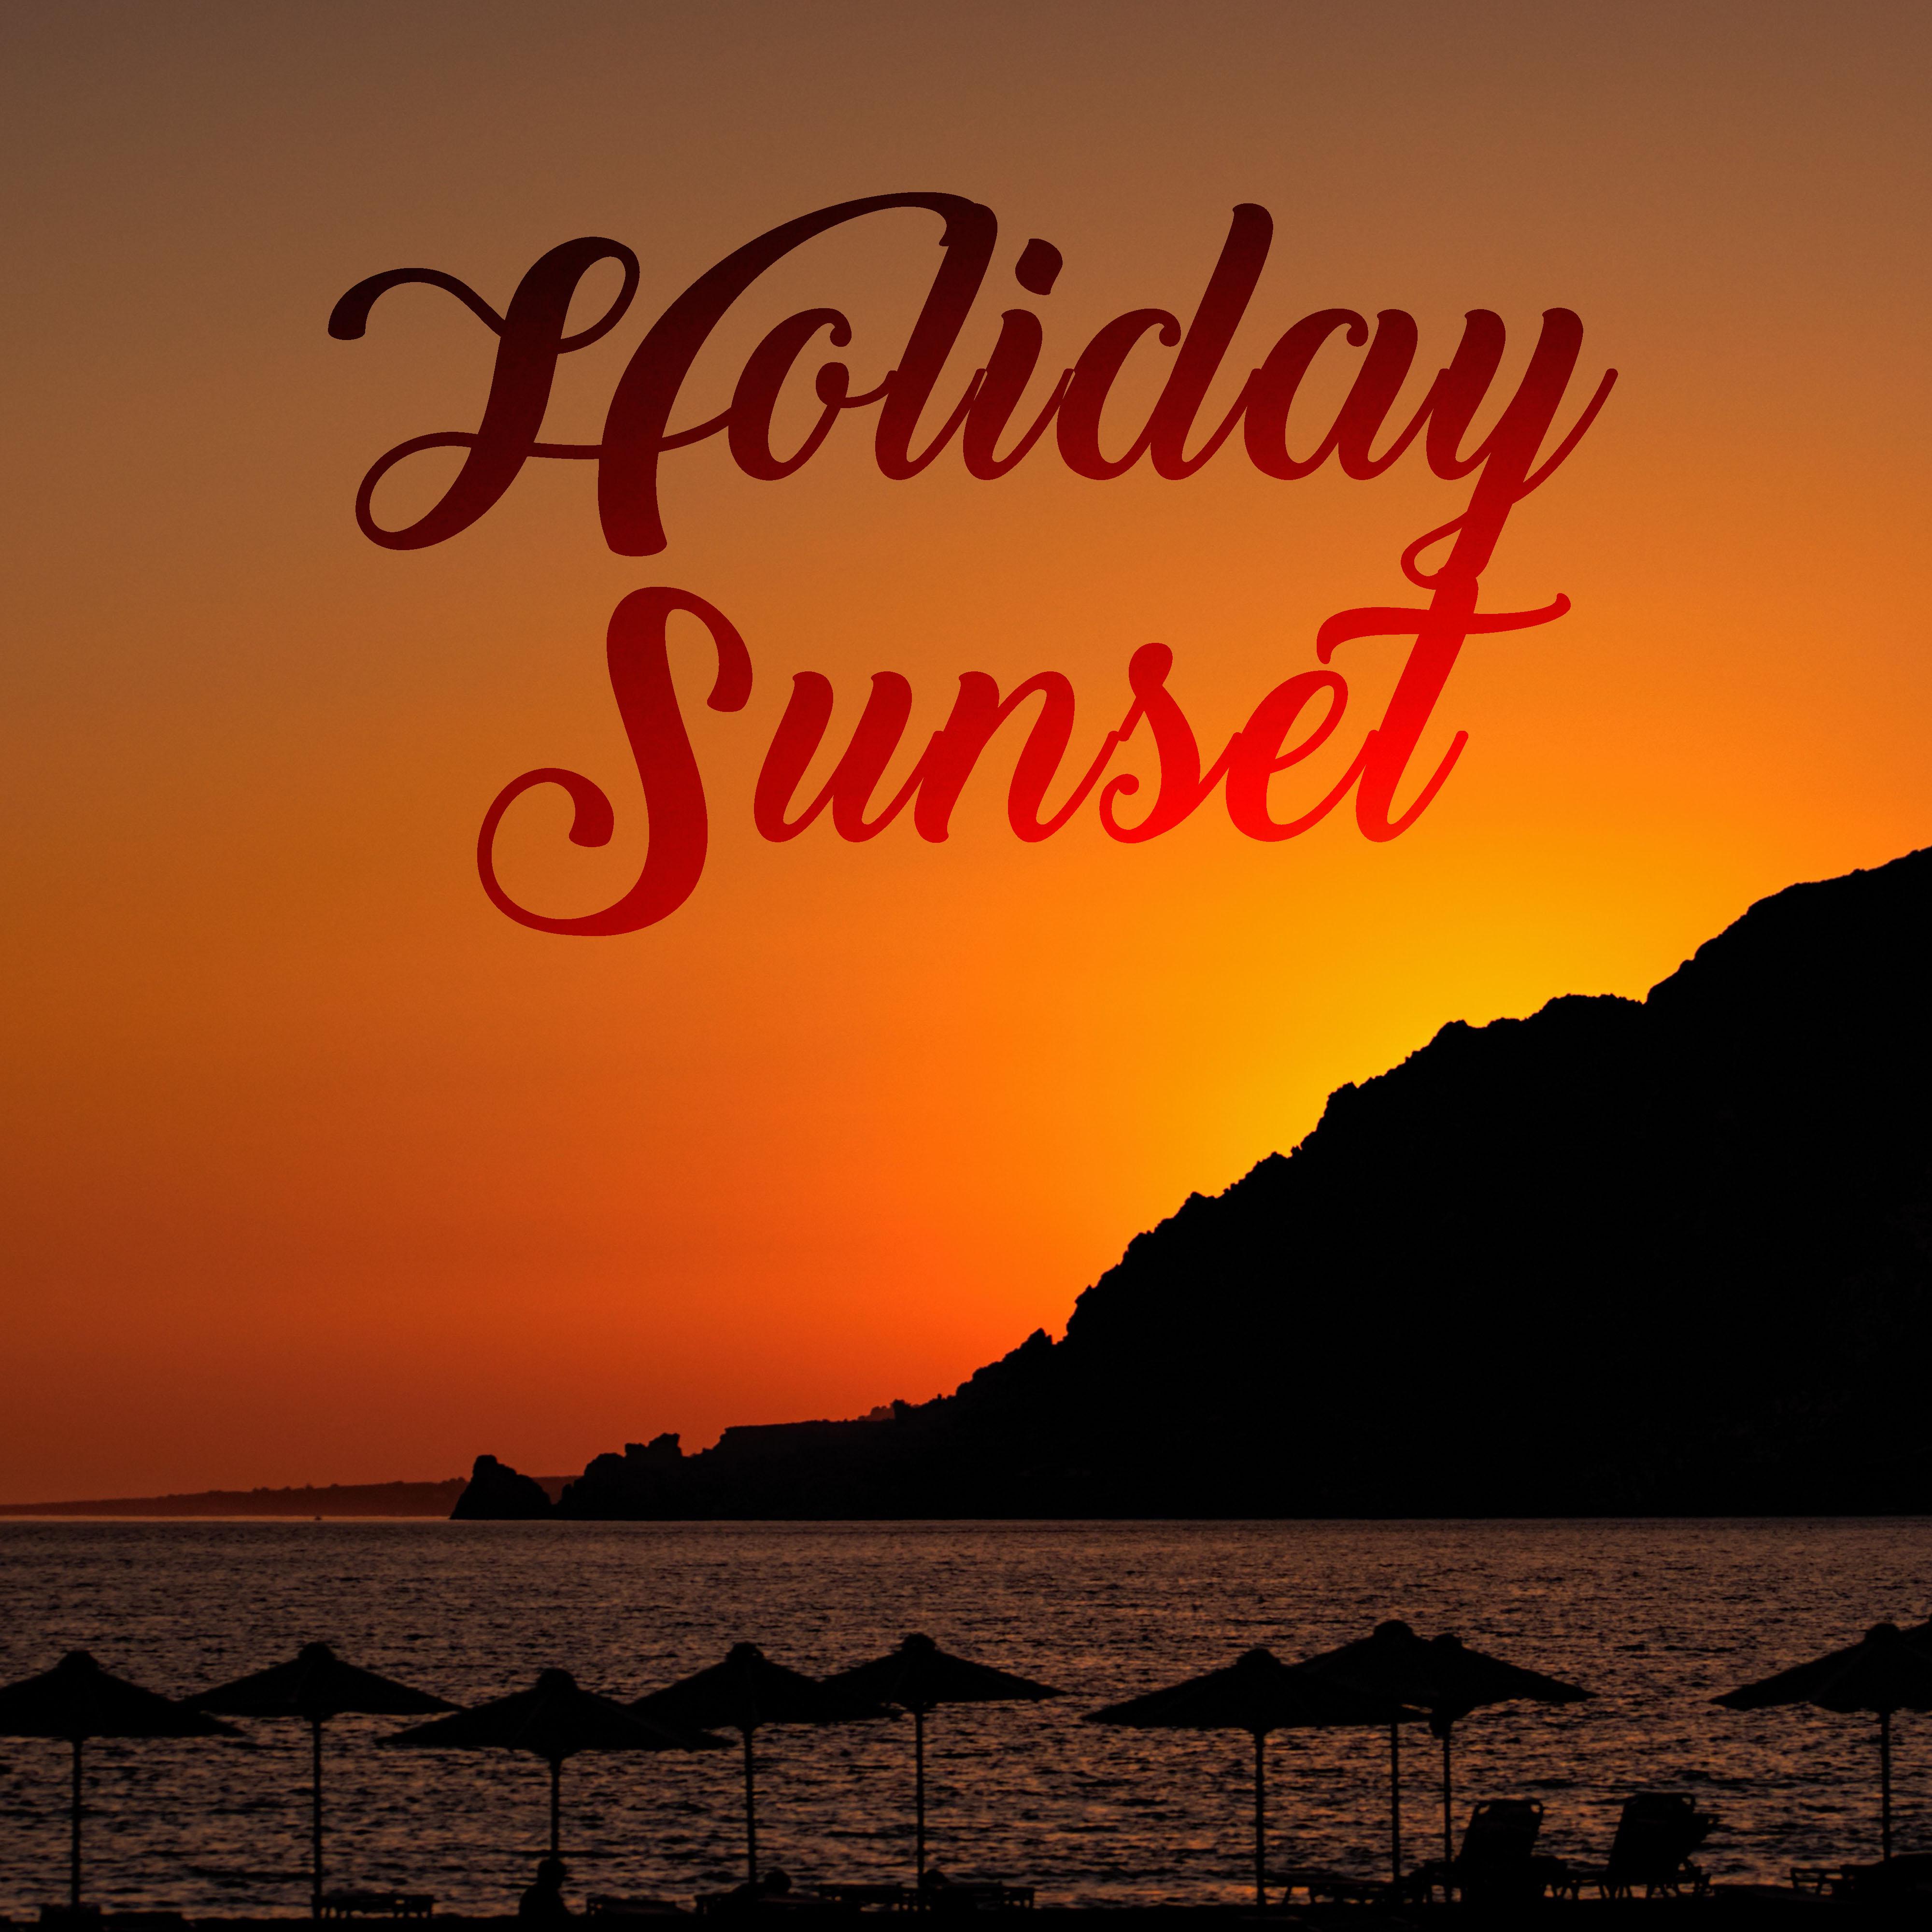 Holiday Sunset – Tropical Chill Out Music, Ibiza Summertime, Relax, Beach Chill, Peaceful Music for Rest